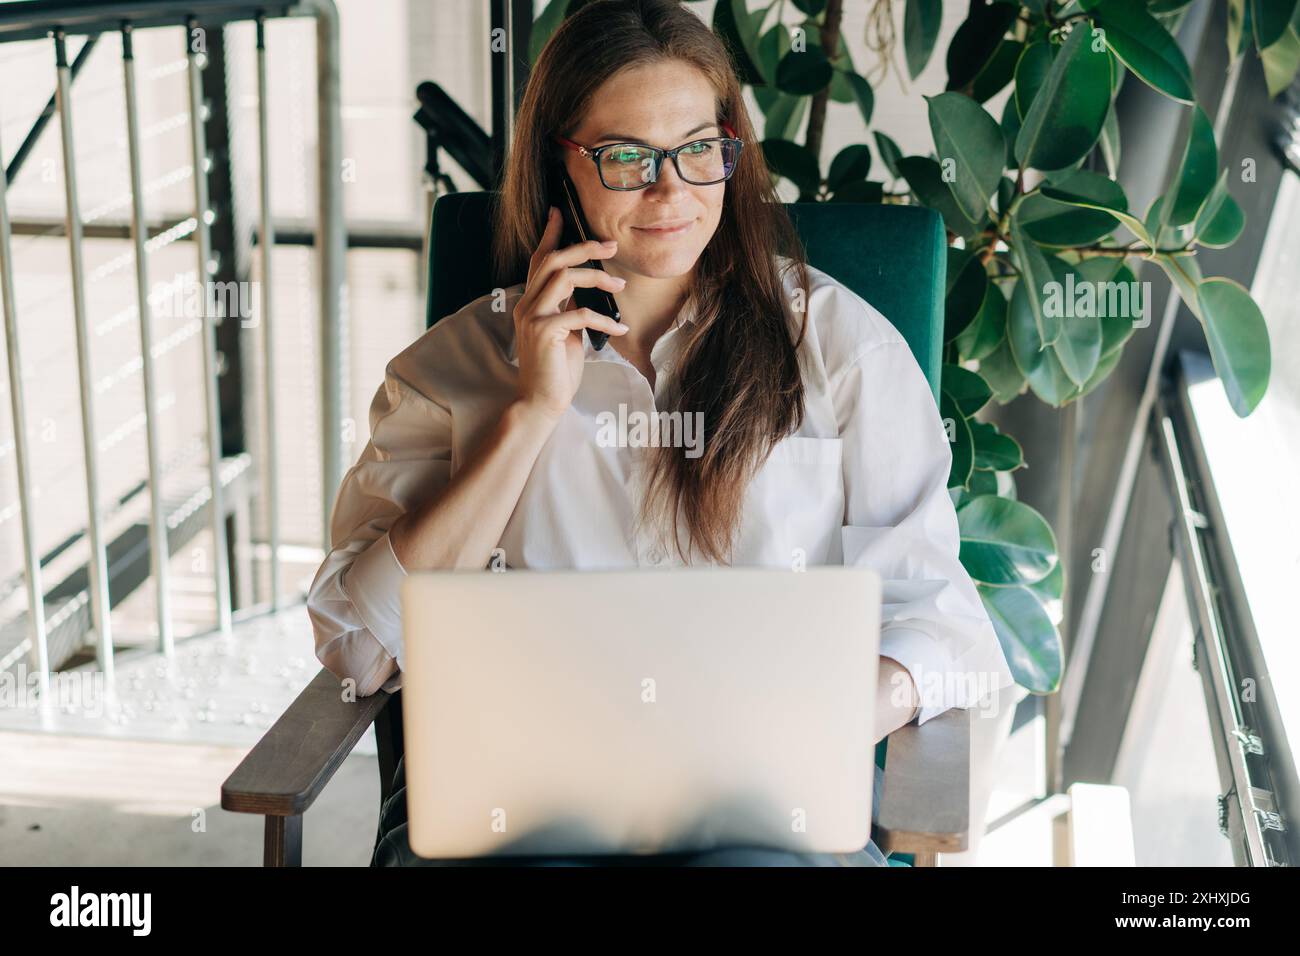 Young business woman talking on the phone and working using a laptop. Stock Photo